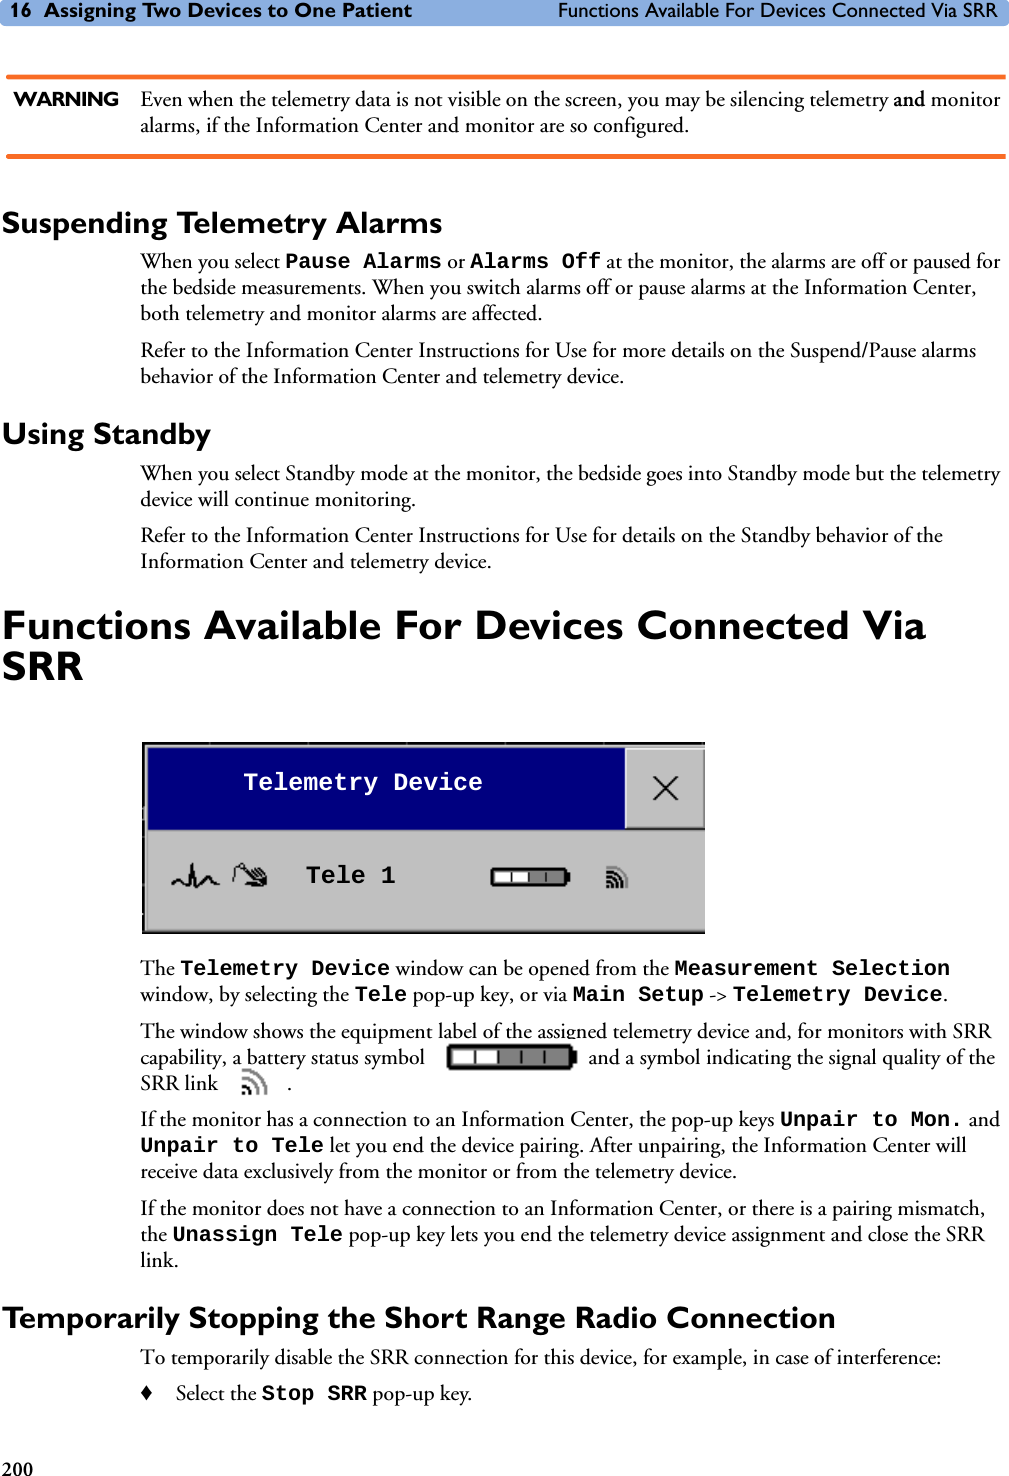 16 Assigning Two Devices to One Patient Functions Available For Devices Connected Via SRR200WARNING Even when the telemetry data is not visible on the screen, you may be silencing telemetry and monitor alarms, if the Information Center and monitor are so configured.Suspending Telemetry AlarmsWhen you select Pause Alarms or Alarms Off at the monitor, the alarms are off or paused for the bedside measurements. When you switch alarms off or pause alarms at the Information Center, both telemetry and monitor alarms are affected.Refer to the Information Center Instructions for Use for more details on the Suspend/Pause alarms behavior of the Information Center and telemetry device. Using StandbyWhen you select Standby mode at the monitor, the bedside goes into Standby mode but the telemetry device will continue monitoring. Refer to the Information Center Instructions for Use for details on the Standby behavior of the Information Center and telemetry device. Functions Available For Devices Connected Via SRRThe Telemetry Device window can be opened from the Measurement Selection window, by selecting the Tele pop-up key, or via Main Setup -&gt; Telemetry Device.The window shows the equipment label of the assigned telemetry device and, for monitors with SRR capability, a battery status symbol   and a symbol indicating the signal quality of the SRR link  . If the monitor has a connection to an Information Center, the pop-up keys Unpair to Mon. and Unpair to Tele let you end the device pairing. After unpairing, the Information Center will receive data exclusively from the monitor or from the telemetry device.If the monitor does not have a connection to an Information Center, or there is a pairing mismatch, the Unassign Tele pop-up key lets you end the telemetry device assignment and close the SRR link.Temporarily Stopping the Short Range Radio ConnectionTo temporarily disable the SRR connection for this device, for example, in case of interference:♦Select the Stop SRR pop-up key.Telemetry DeviceTele 1